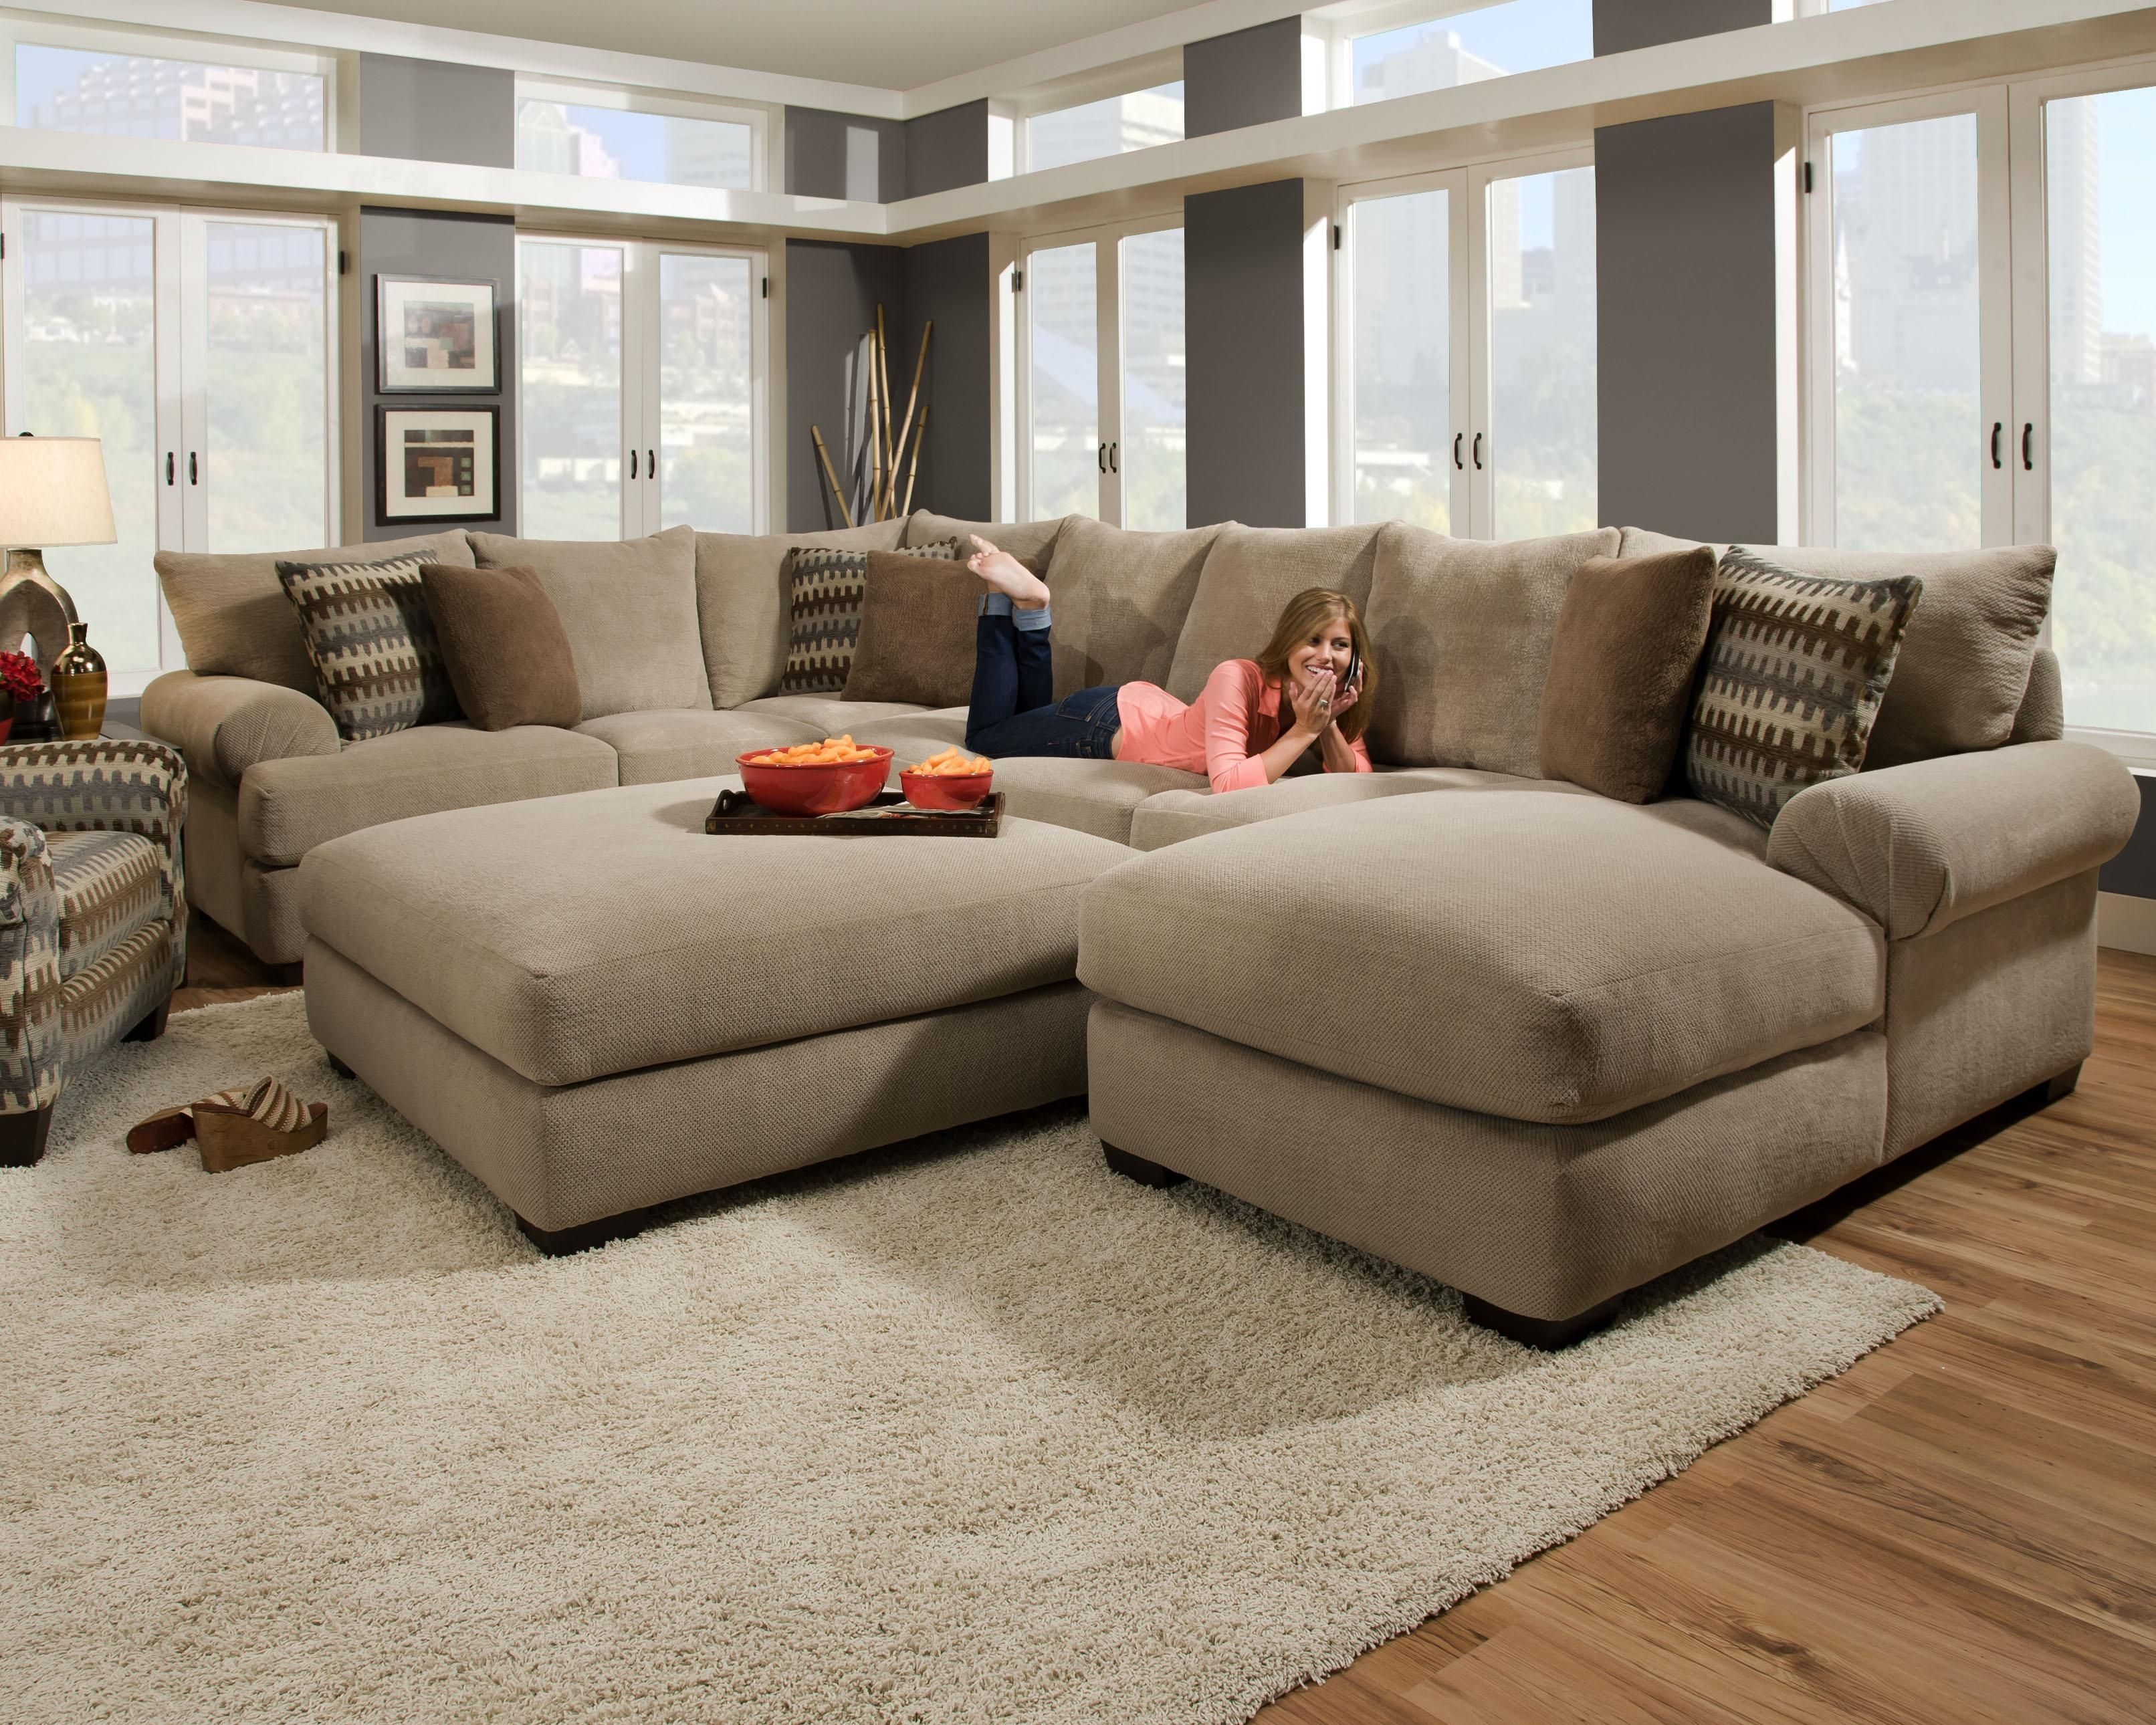 Corinthian 61a0 Sectional Sofa With Right Side Chaise | Furniture With Regard To Jacksonville Nc Sectional Sofas (View 1 of 10)